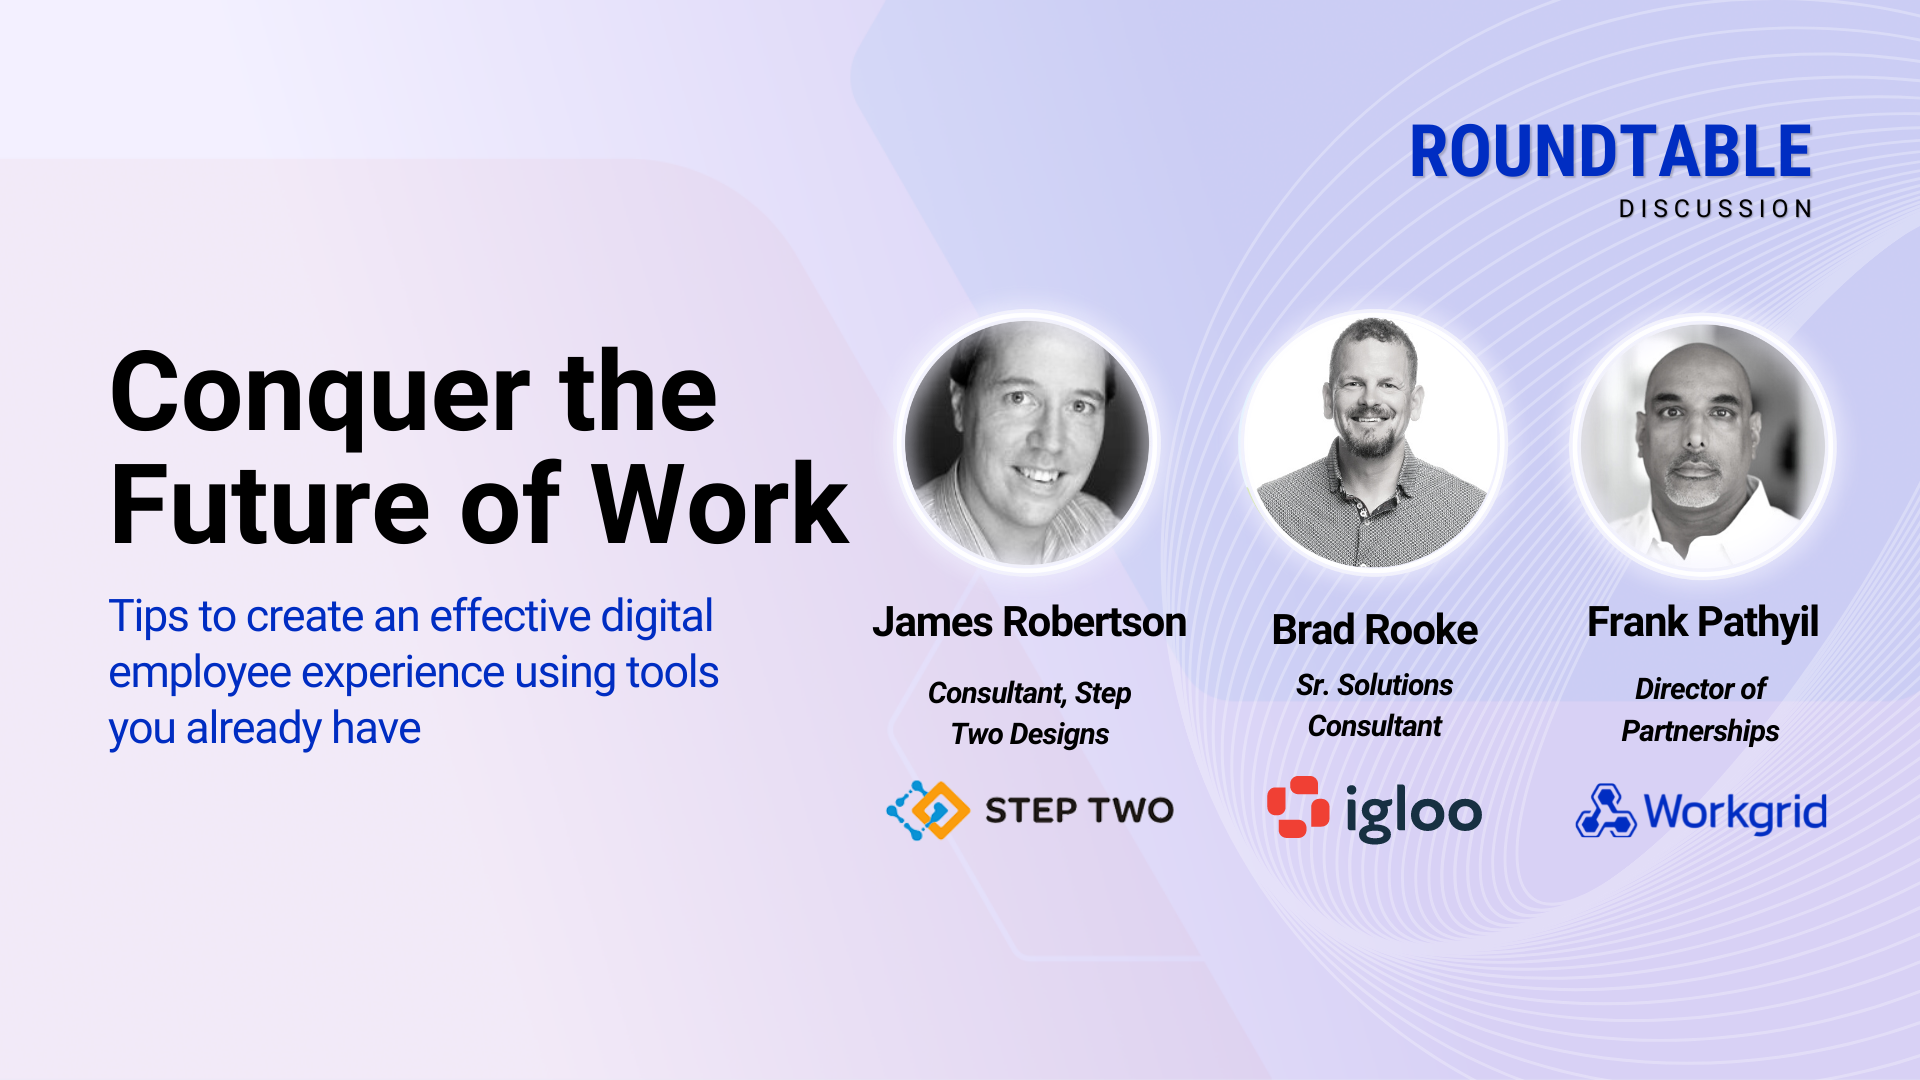 Conquer the Future of Work roundtable discussion with James Robertson, Step Two Designs, Brad Rooke, Igloo Software, and Frank Pathyil, Workgrid